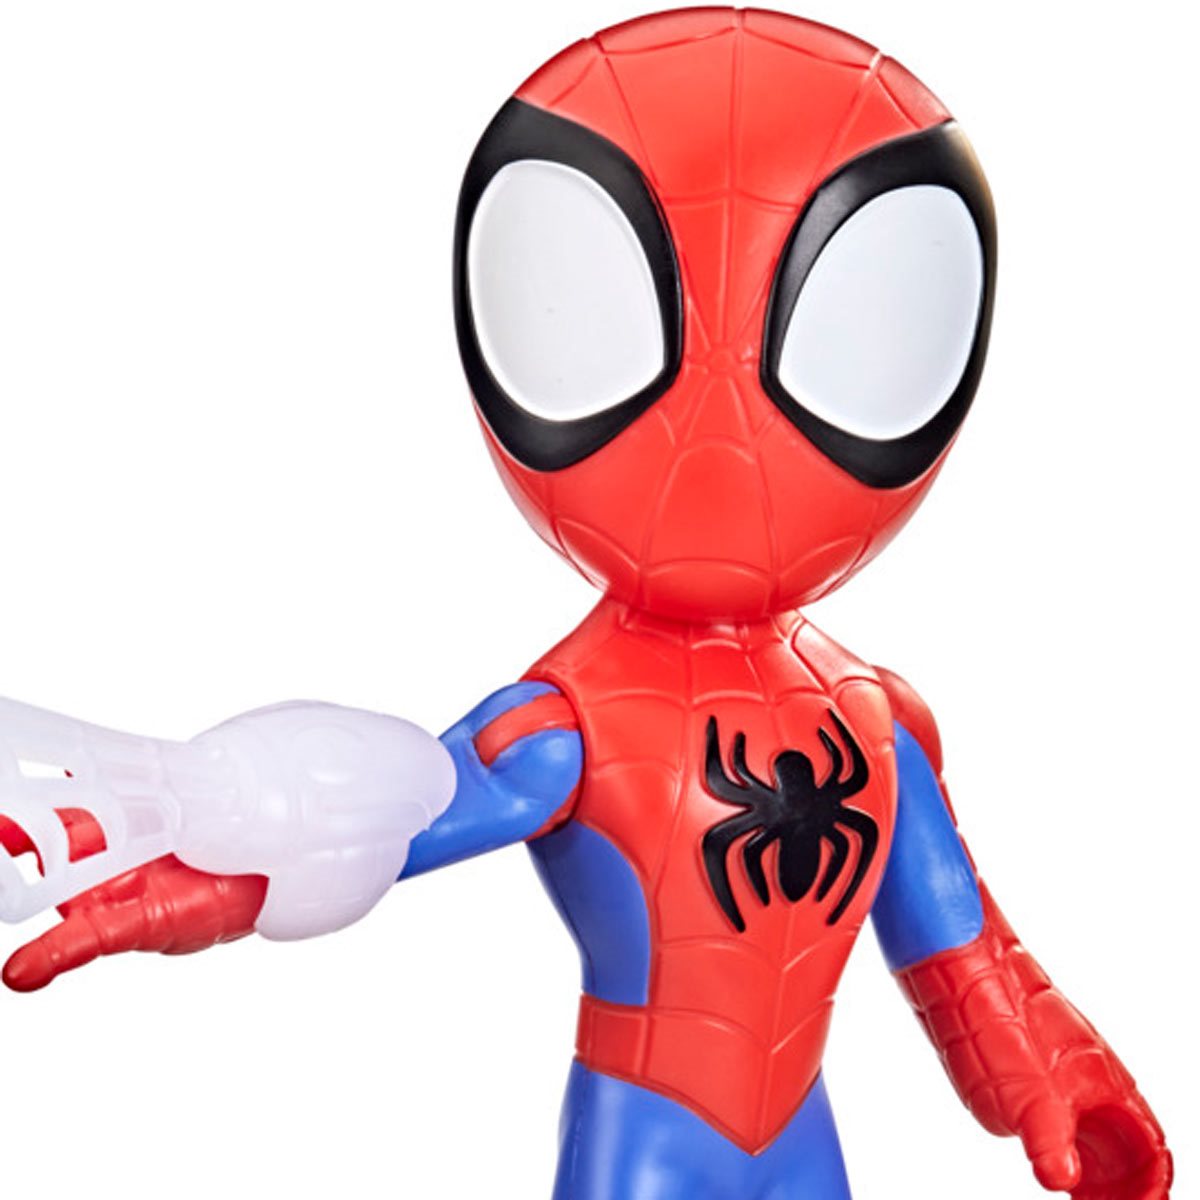 Spidey and His Amazing Friends Supersized Spider-Man 9-inch Action Figure